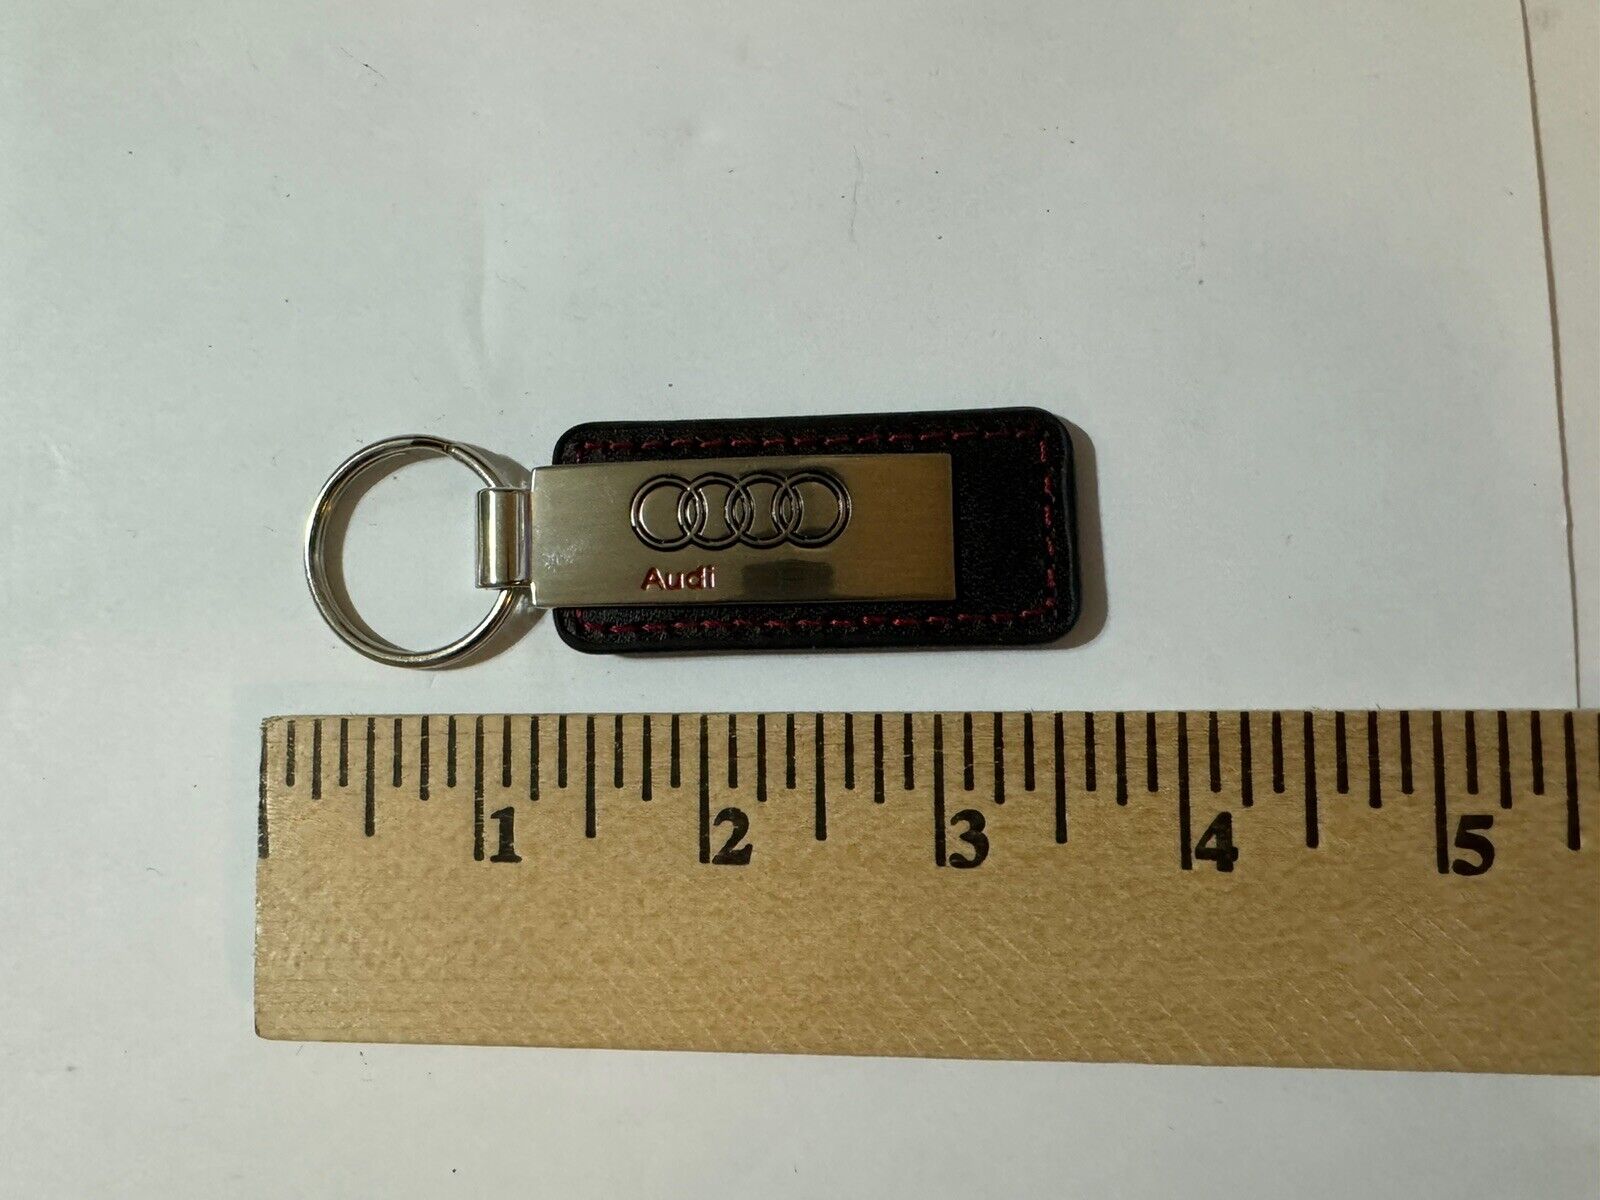 Audi Keychain - Key Ring Chain  from Audi Dallas Great Used Condition